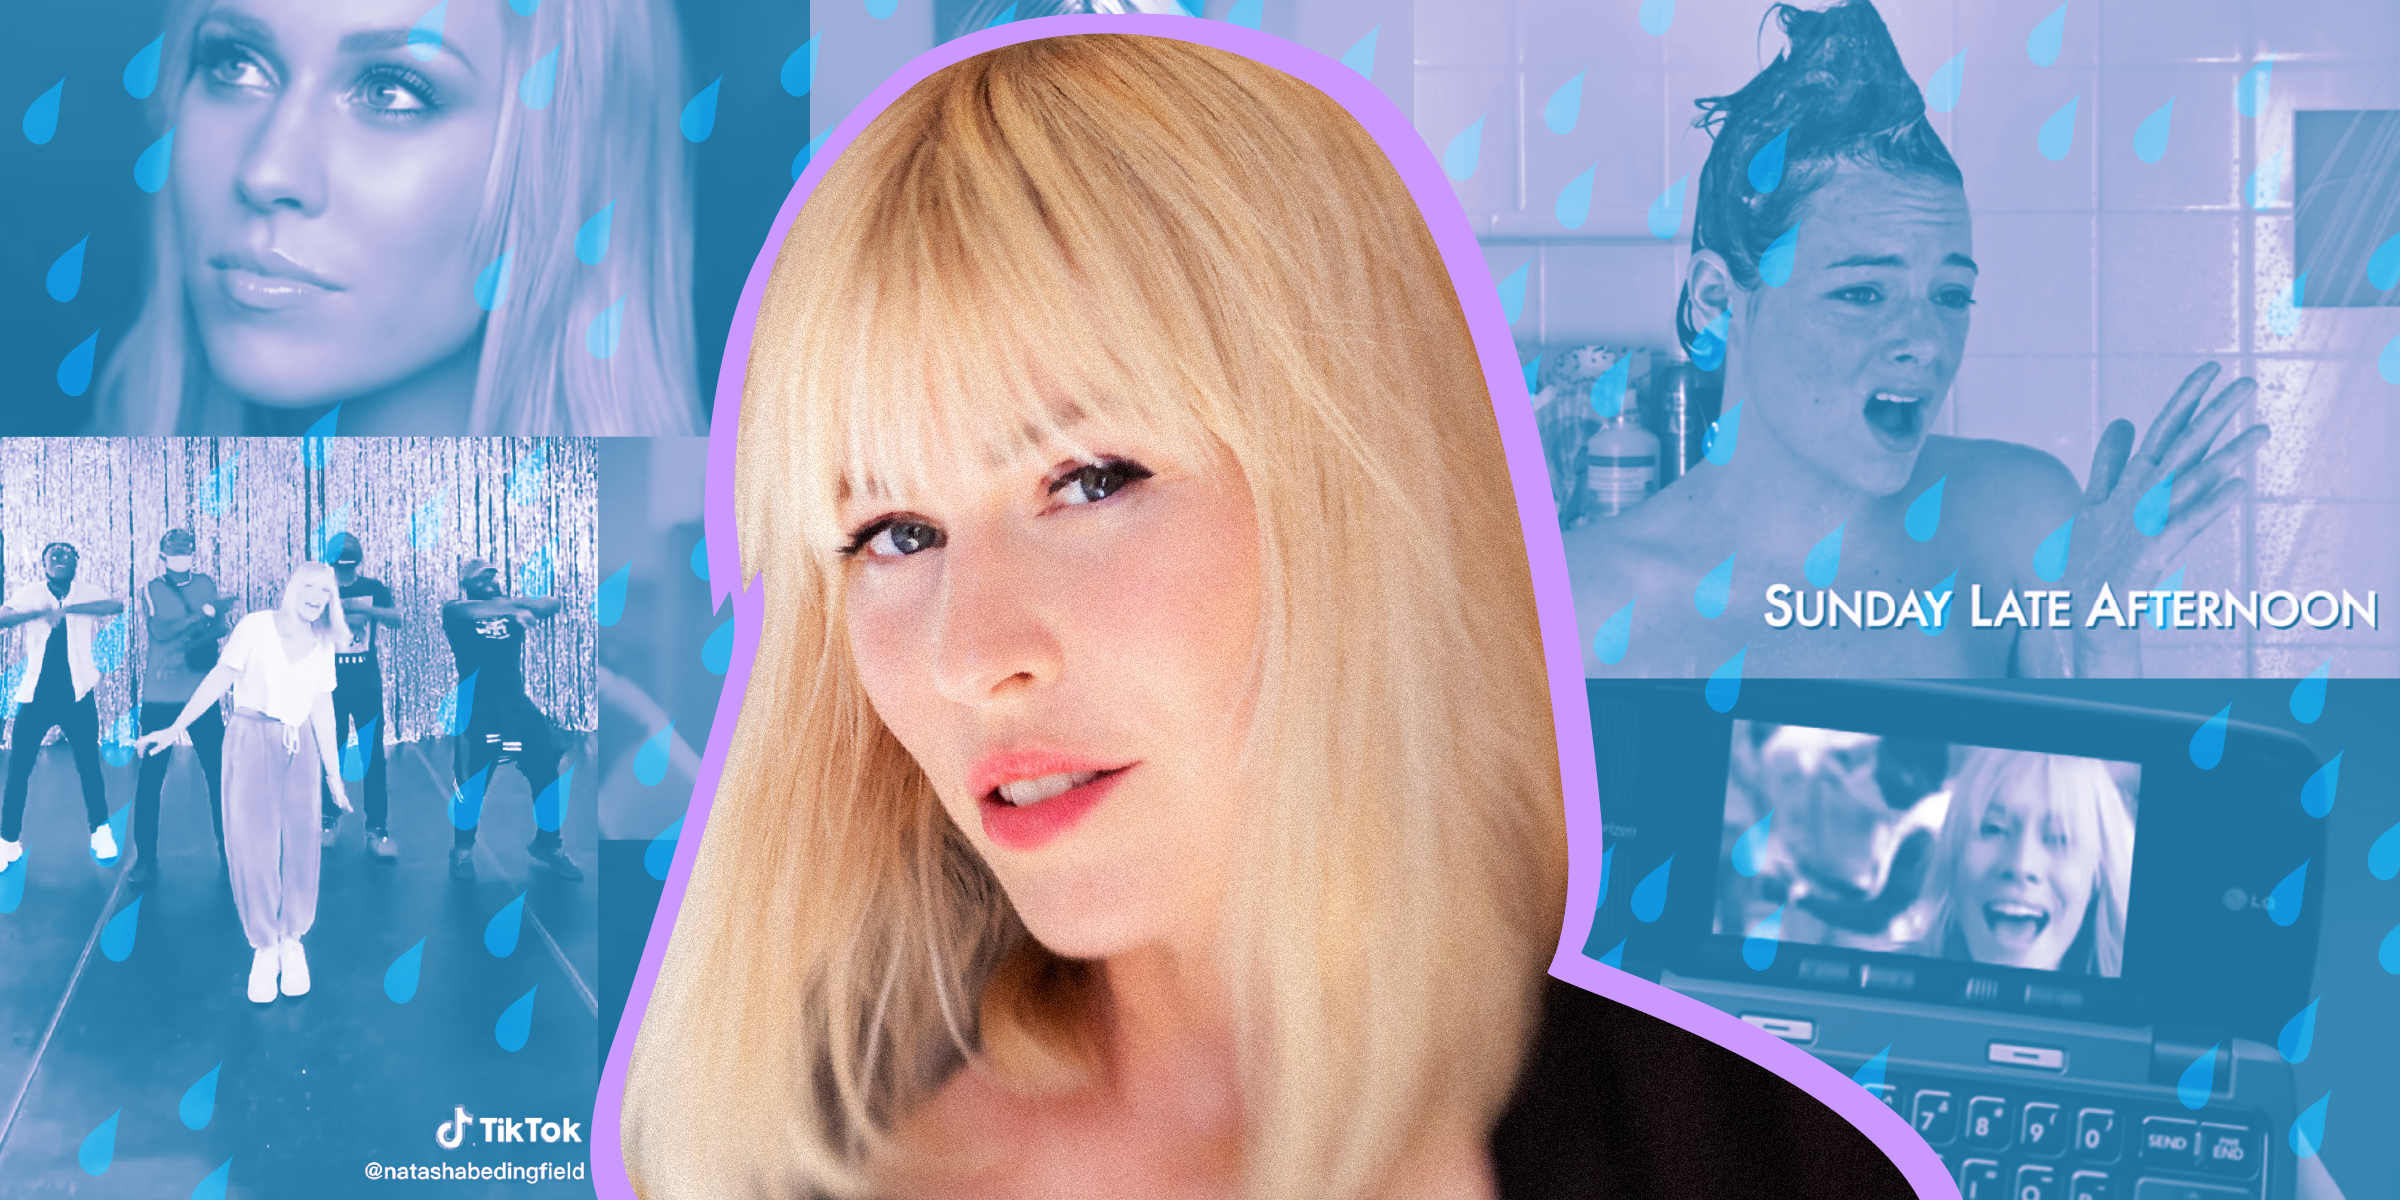 Natasha Bedingfield against a blue and purple backdrop featuring raindrops and screenshots from her music videos, TikTok, and the "Easy A" scene where Emma Stone sings "Pocketful of Sunshine"